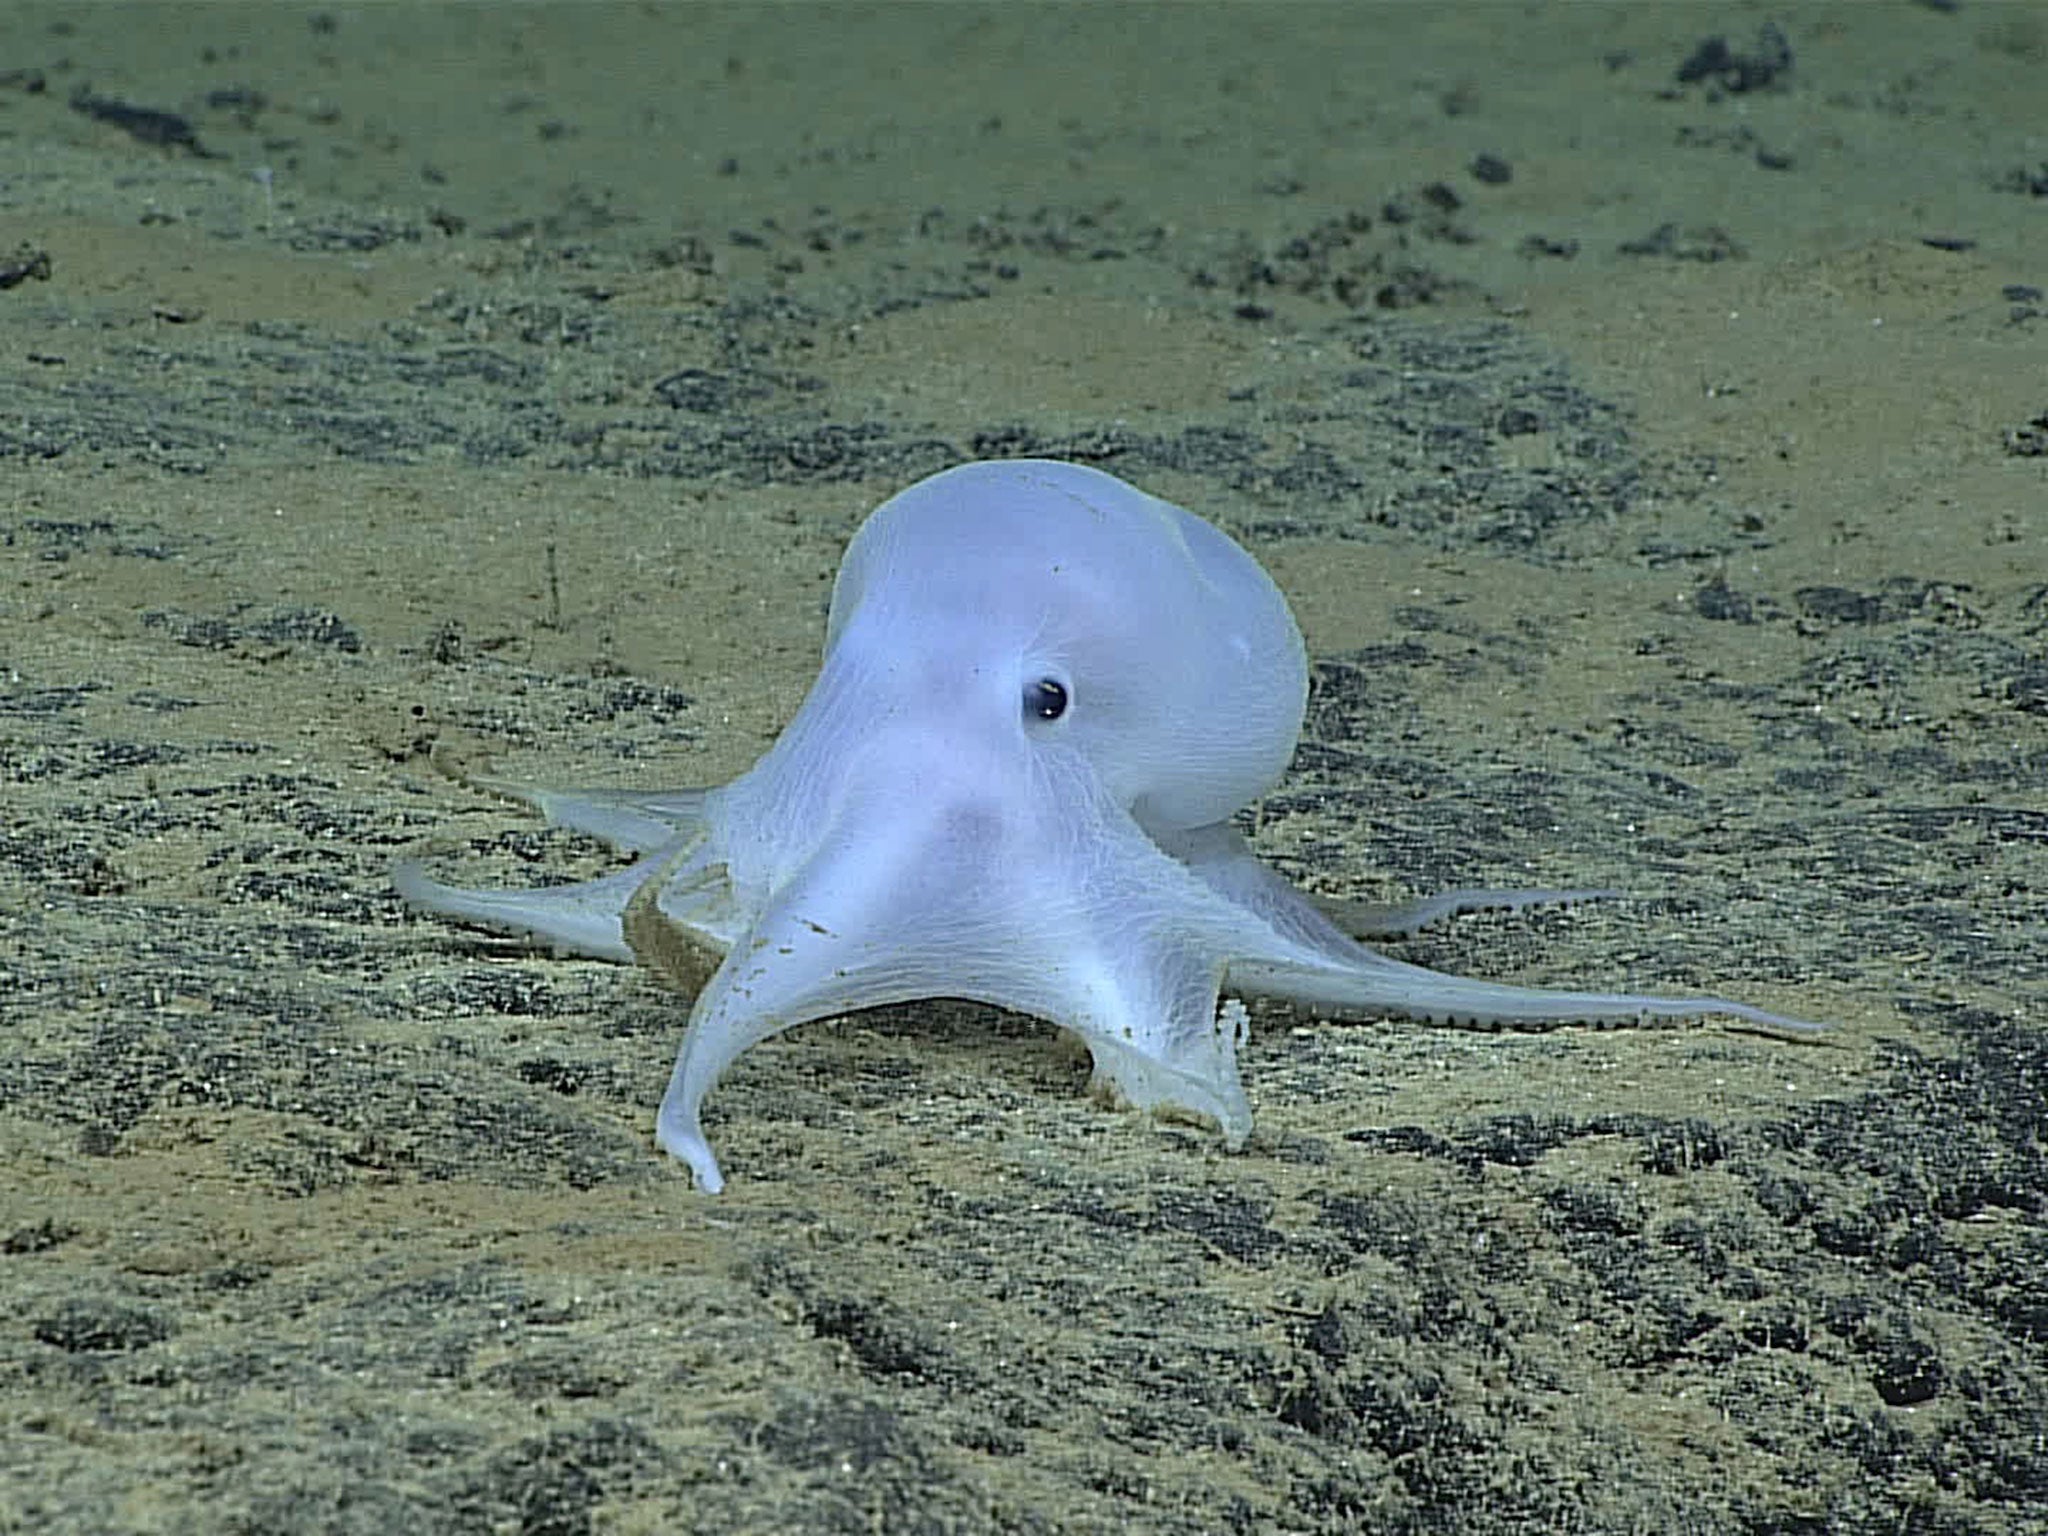 This ghostlike octopod is almost certainly an undescribed species and may not belong to any described genus, the NOAA Office of Ocean Exploration and Research said